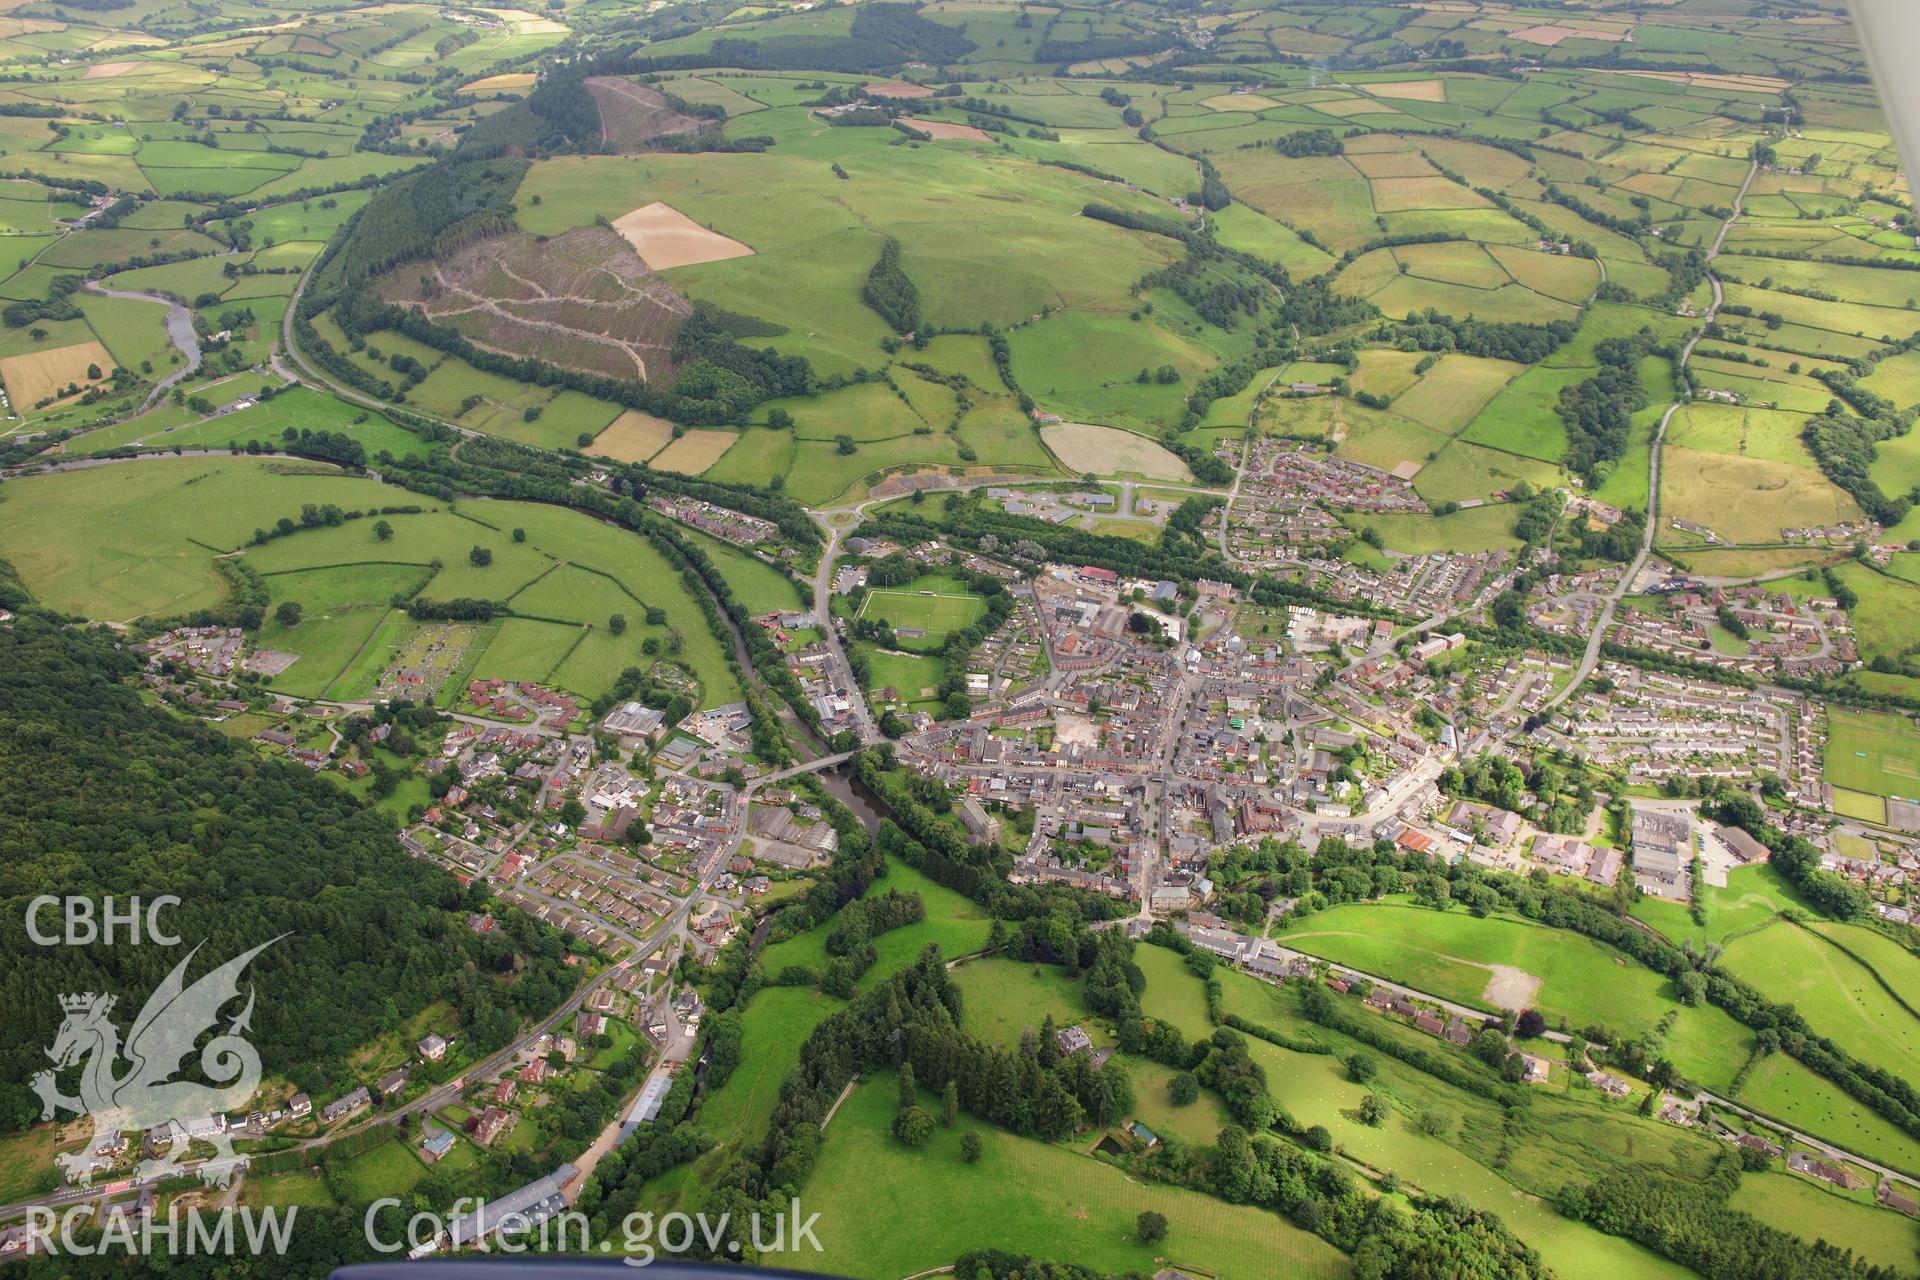 RCAHMW colour oblique photograph of Llanidloes. Taken by Toby Driver on 27/07/2012.